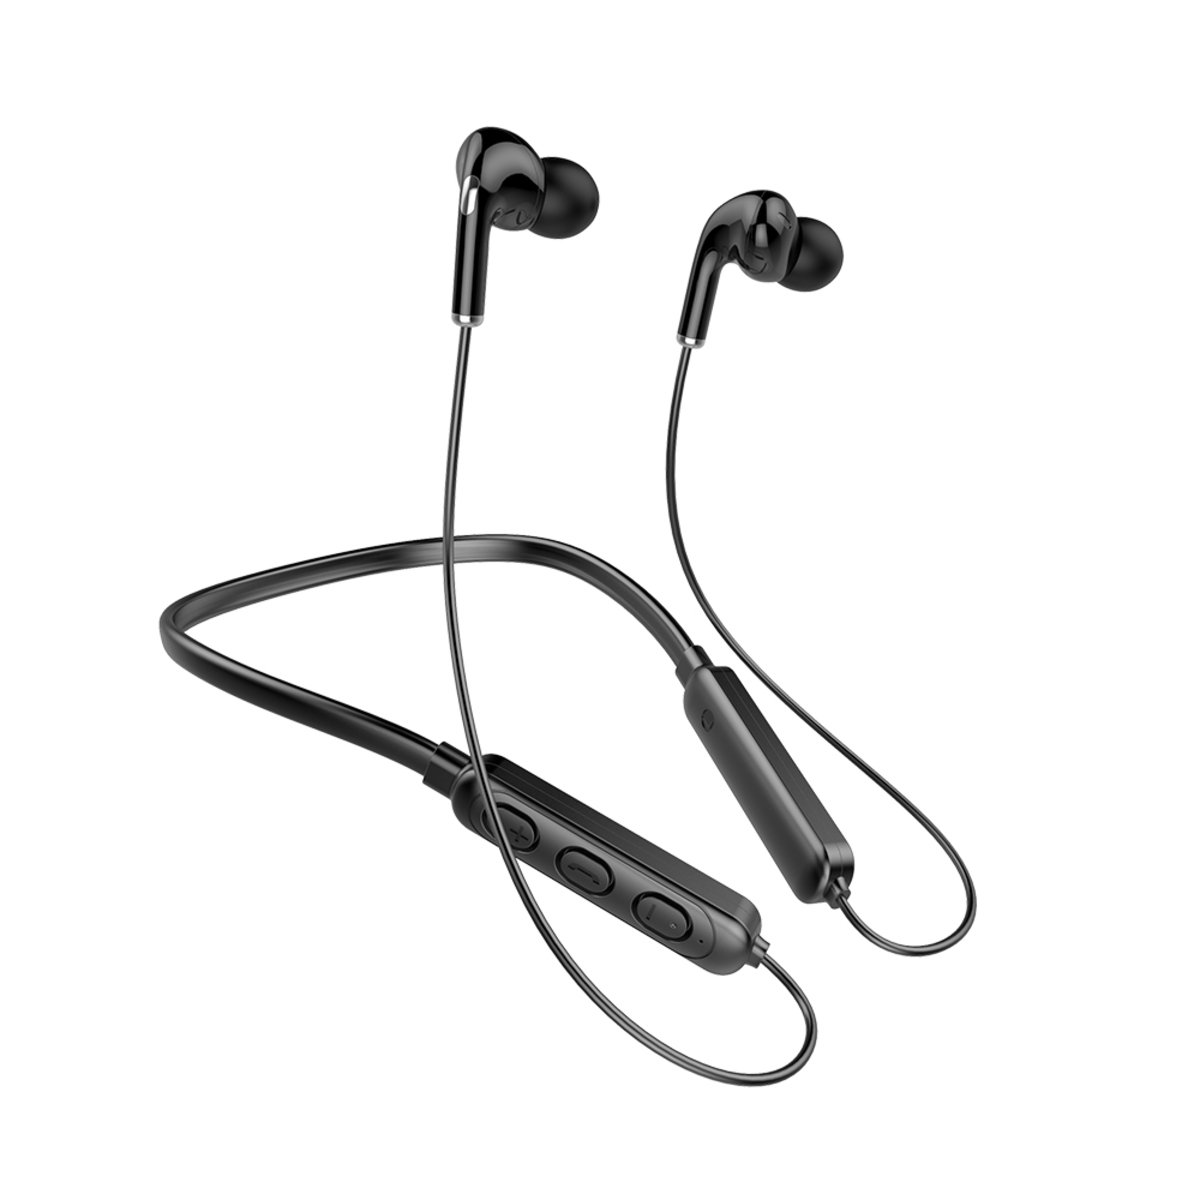 Trands Bluetooth Neckband Wireless Earphone BT973 Online at Best Price, Mobile Hands Free